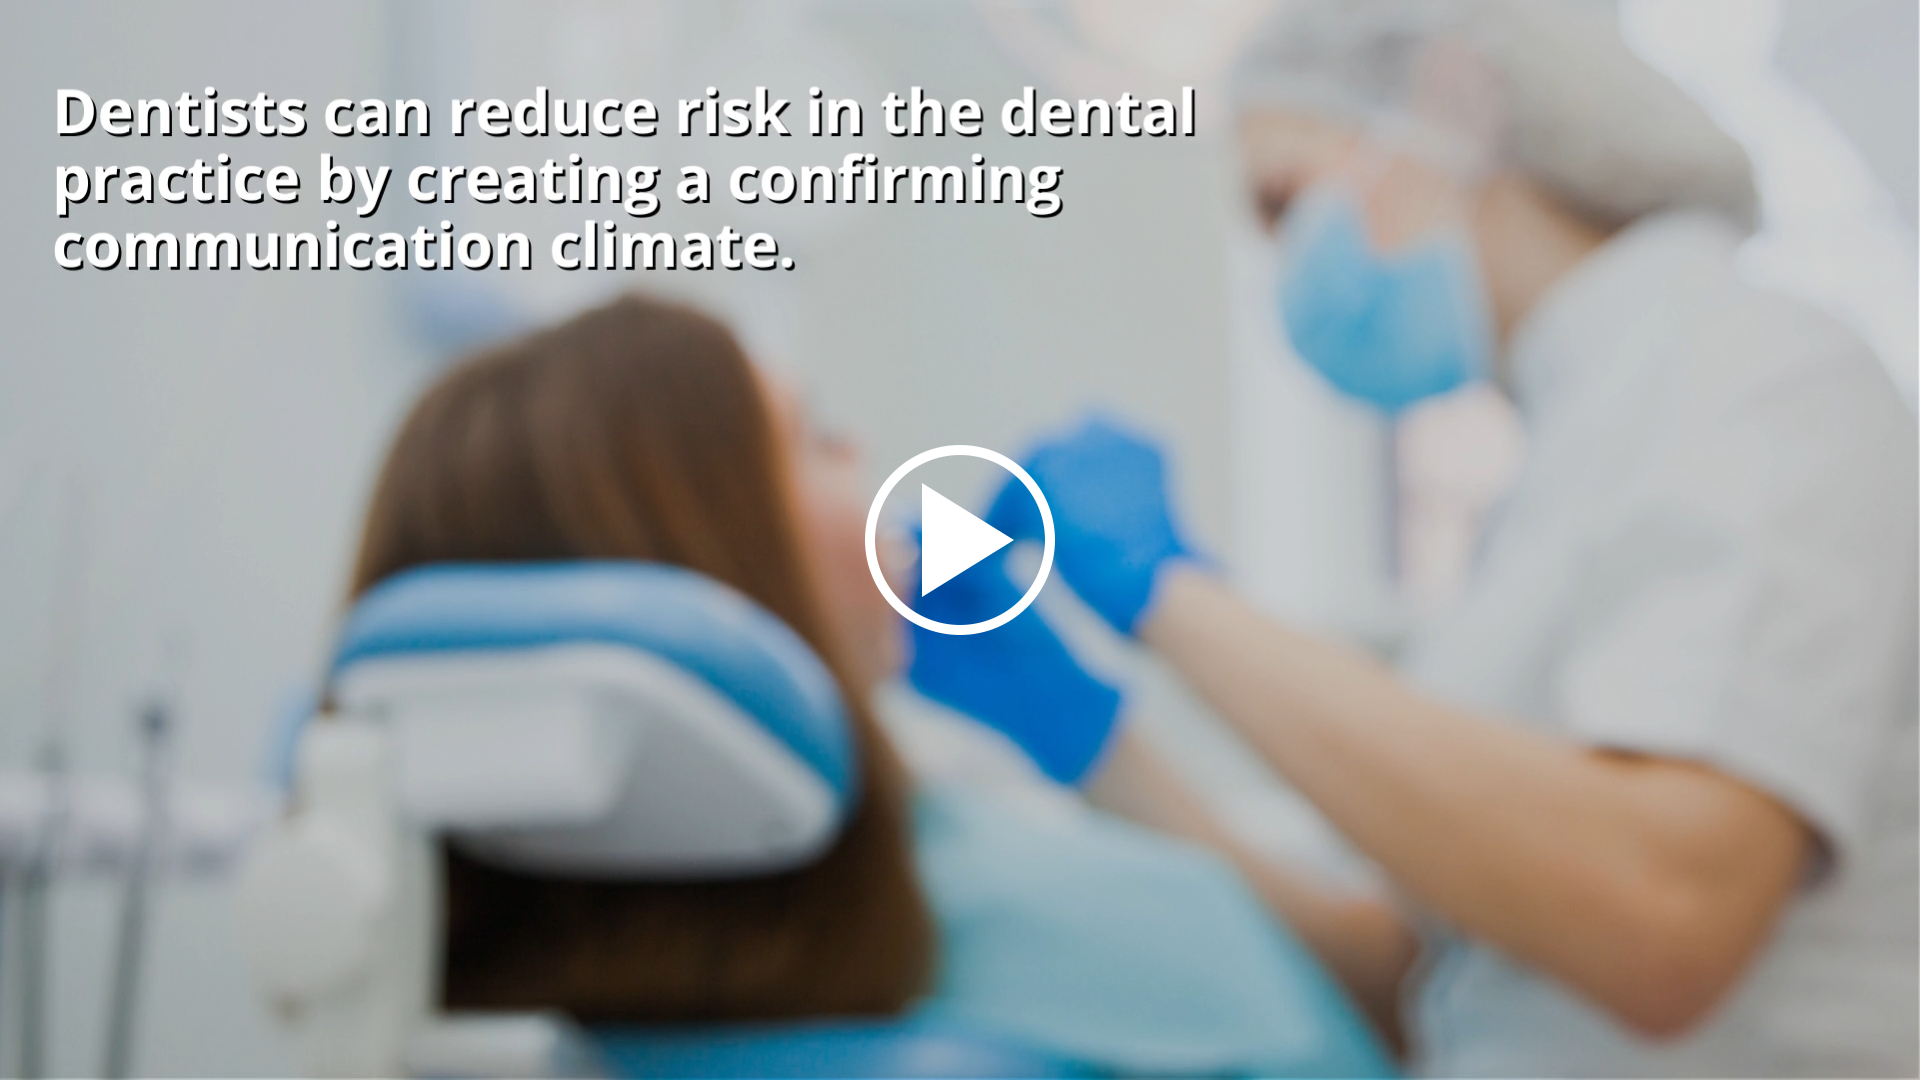 Dentists can reduce risk in the dental pratice by creatin a confirming communication climate.